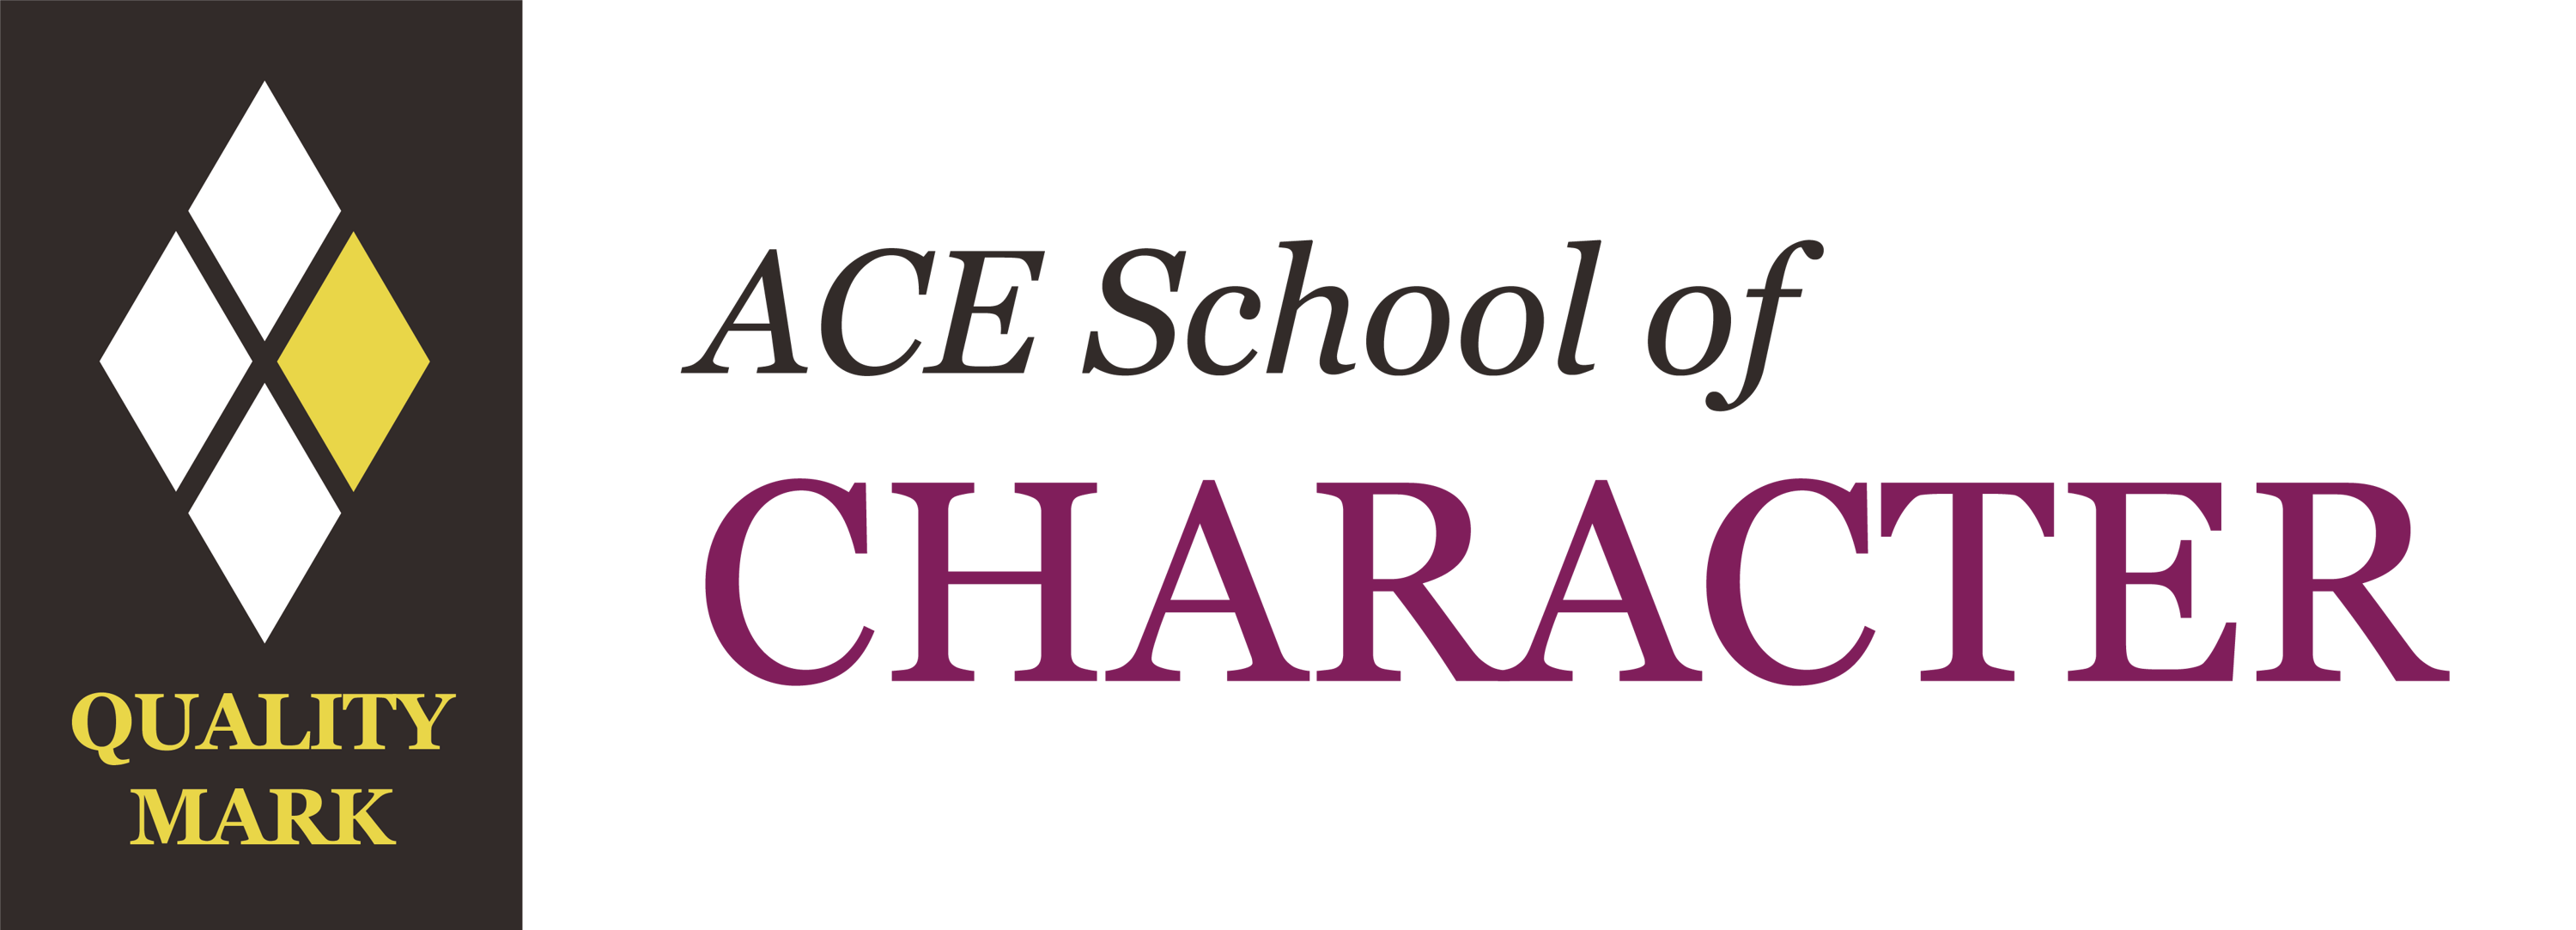 ACE School of CHARACTER   Quality Mark   Logo   for light BGs